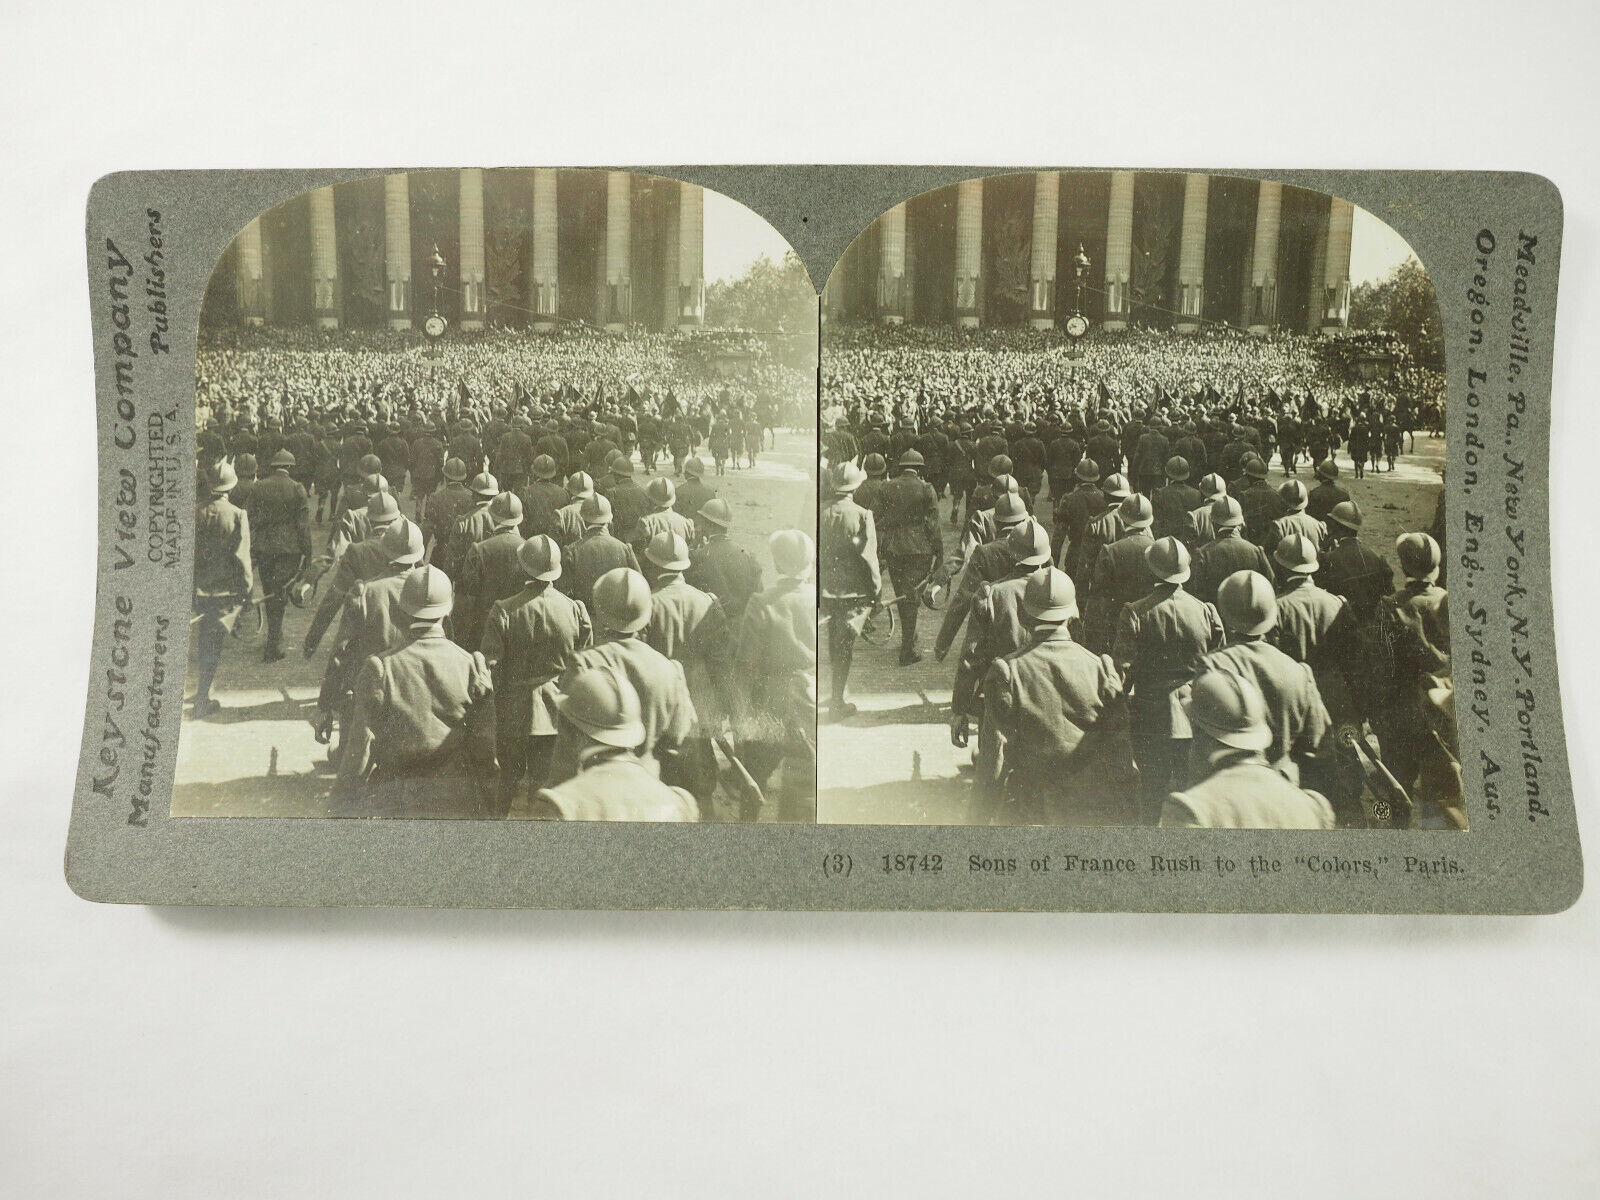 Antique Stereoview Card. Keystone. (3) 18742 Sons of France Rush to the Colors